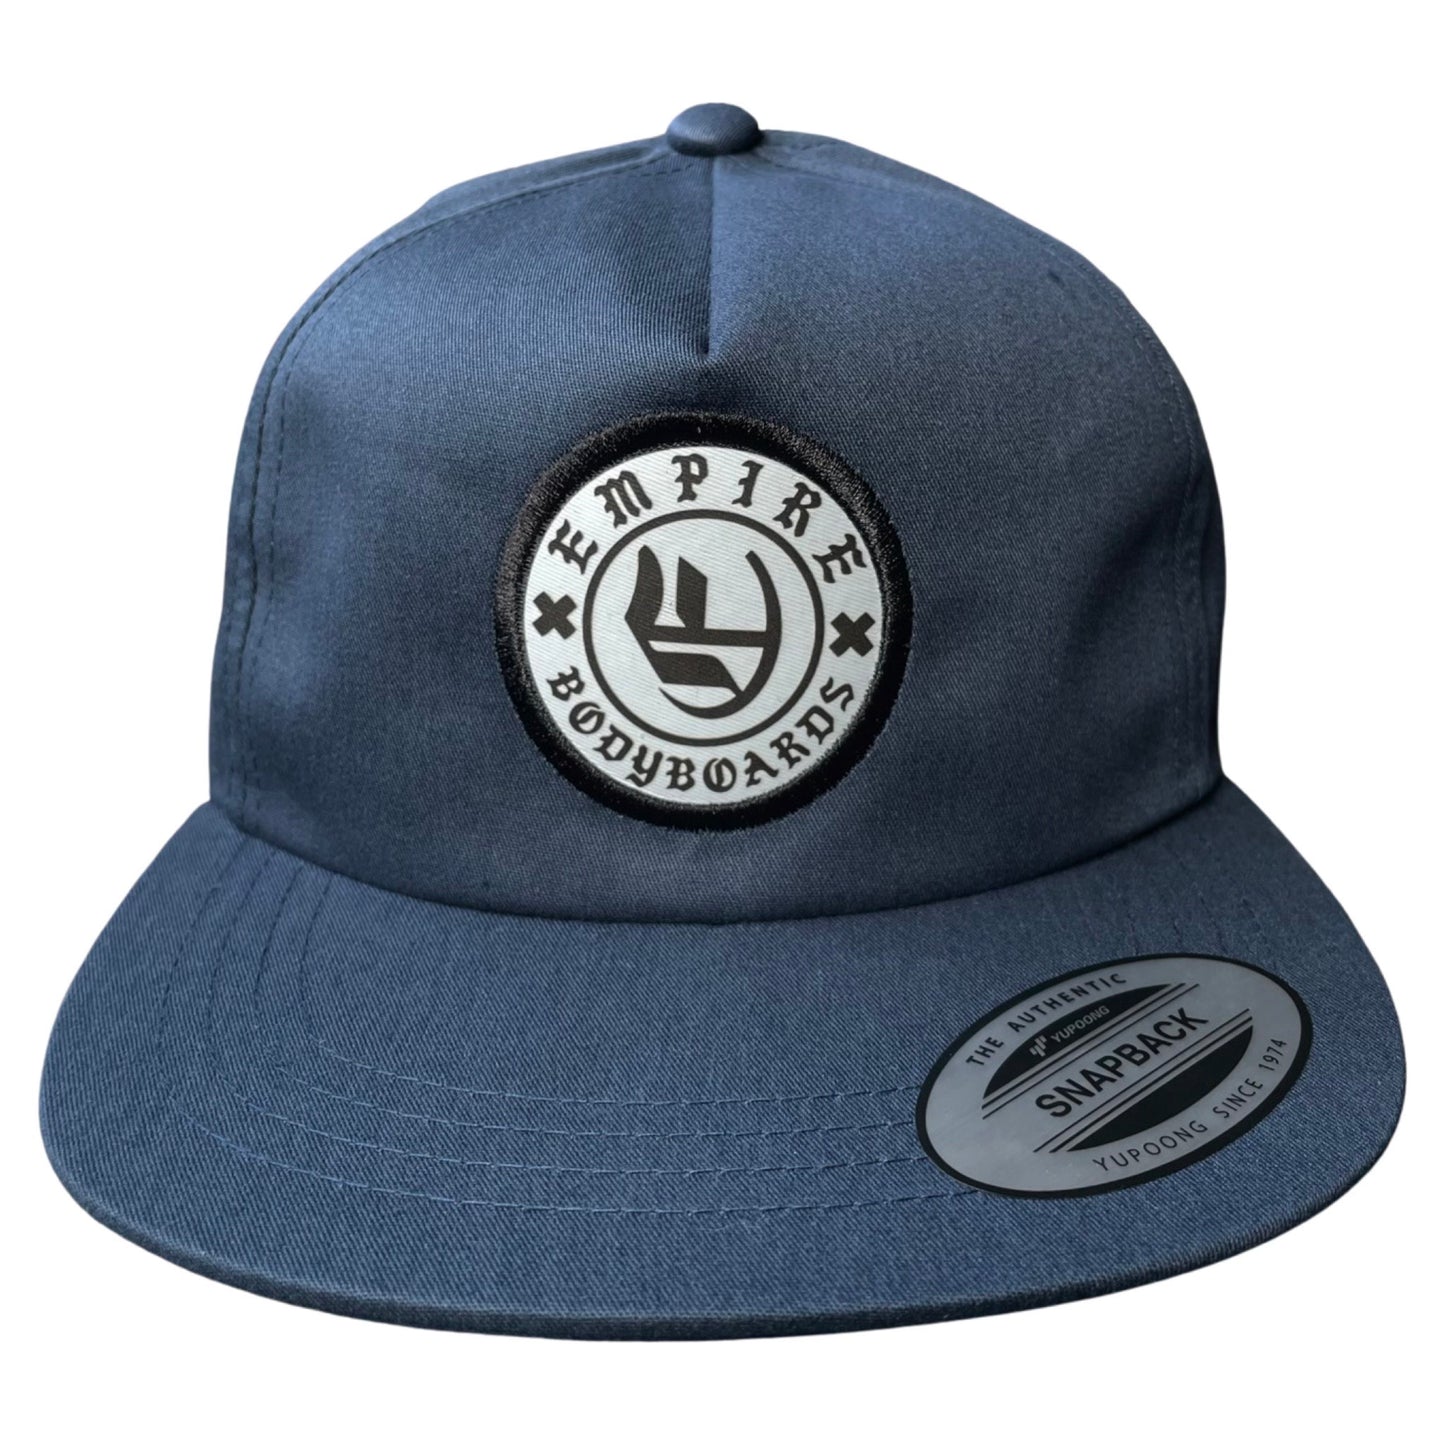 Empire X 662 Unstructured Snapback - Navy